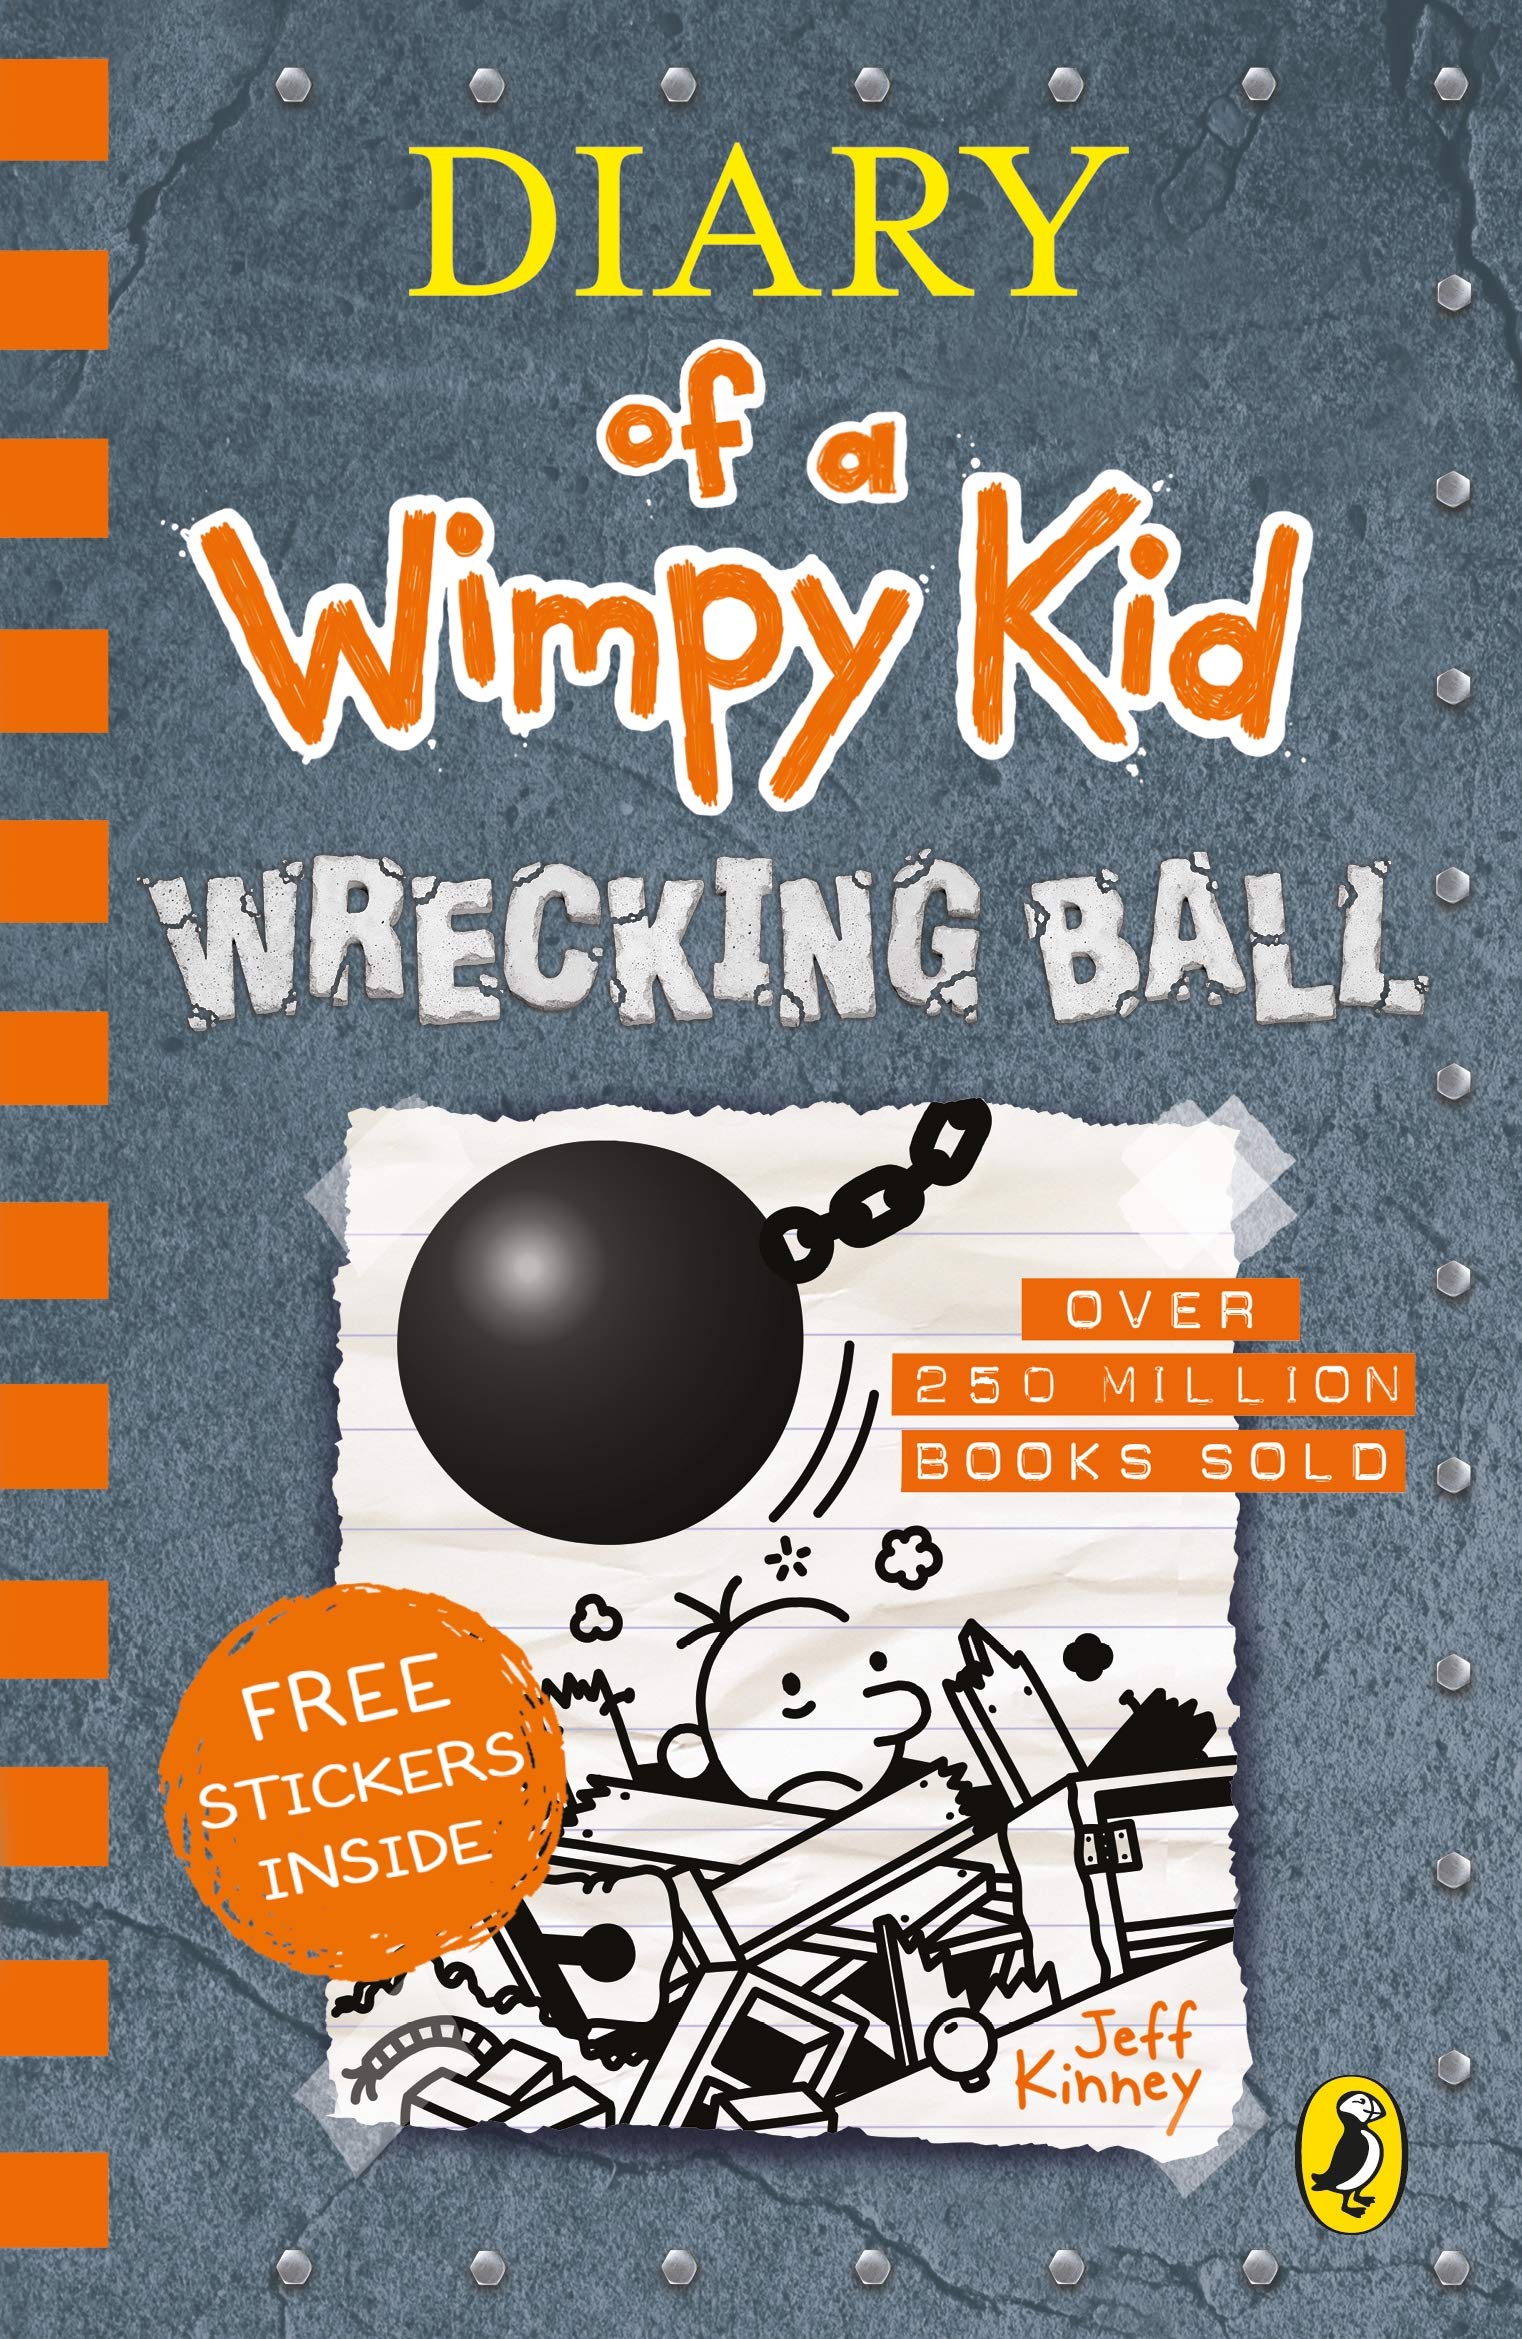 Diary of a Wimpy Kid: Wrecking Ball (হার্ডকভার)